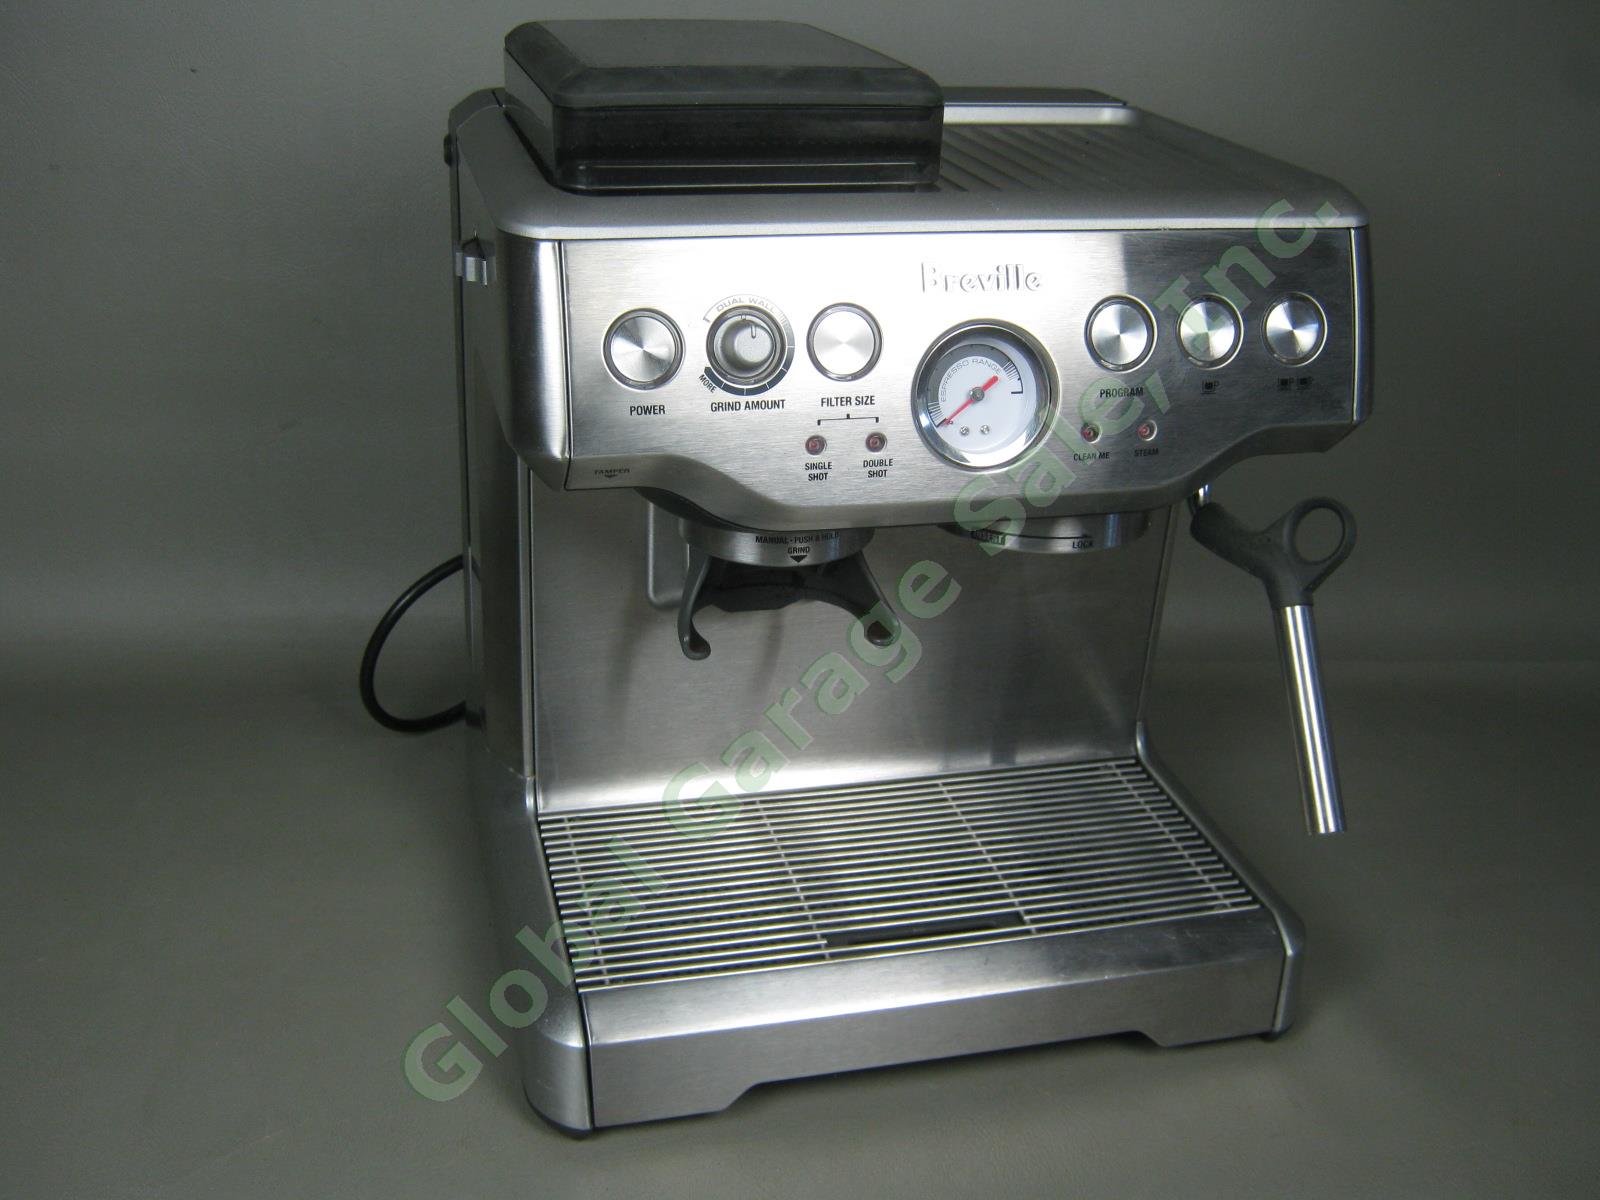 Breville Barista Express BES860XL 8 Cup Espresso Machine Used Only 3 Months! 1